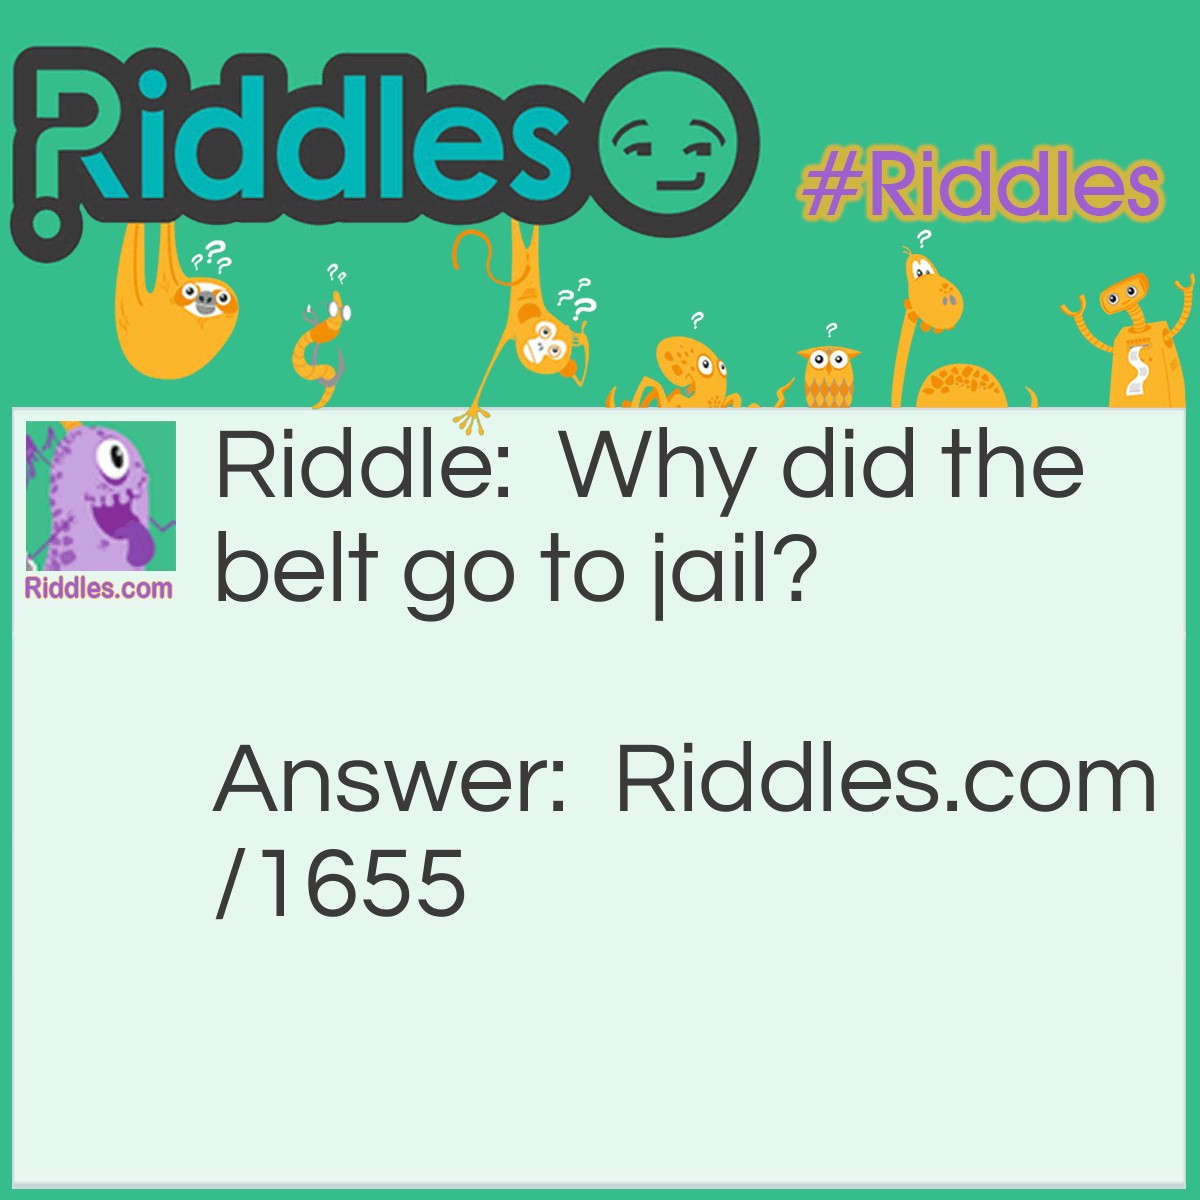 Riddle: Why did the belt go to jail? Answer: For holding up a pair of pants.